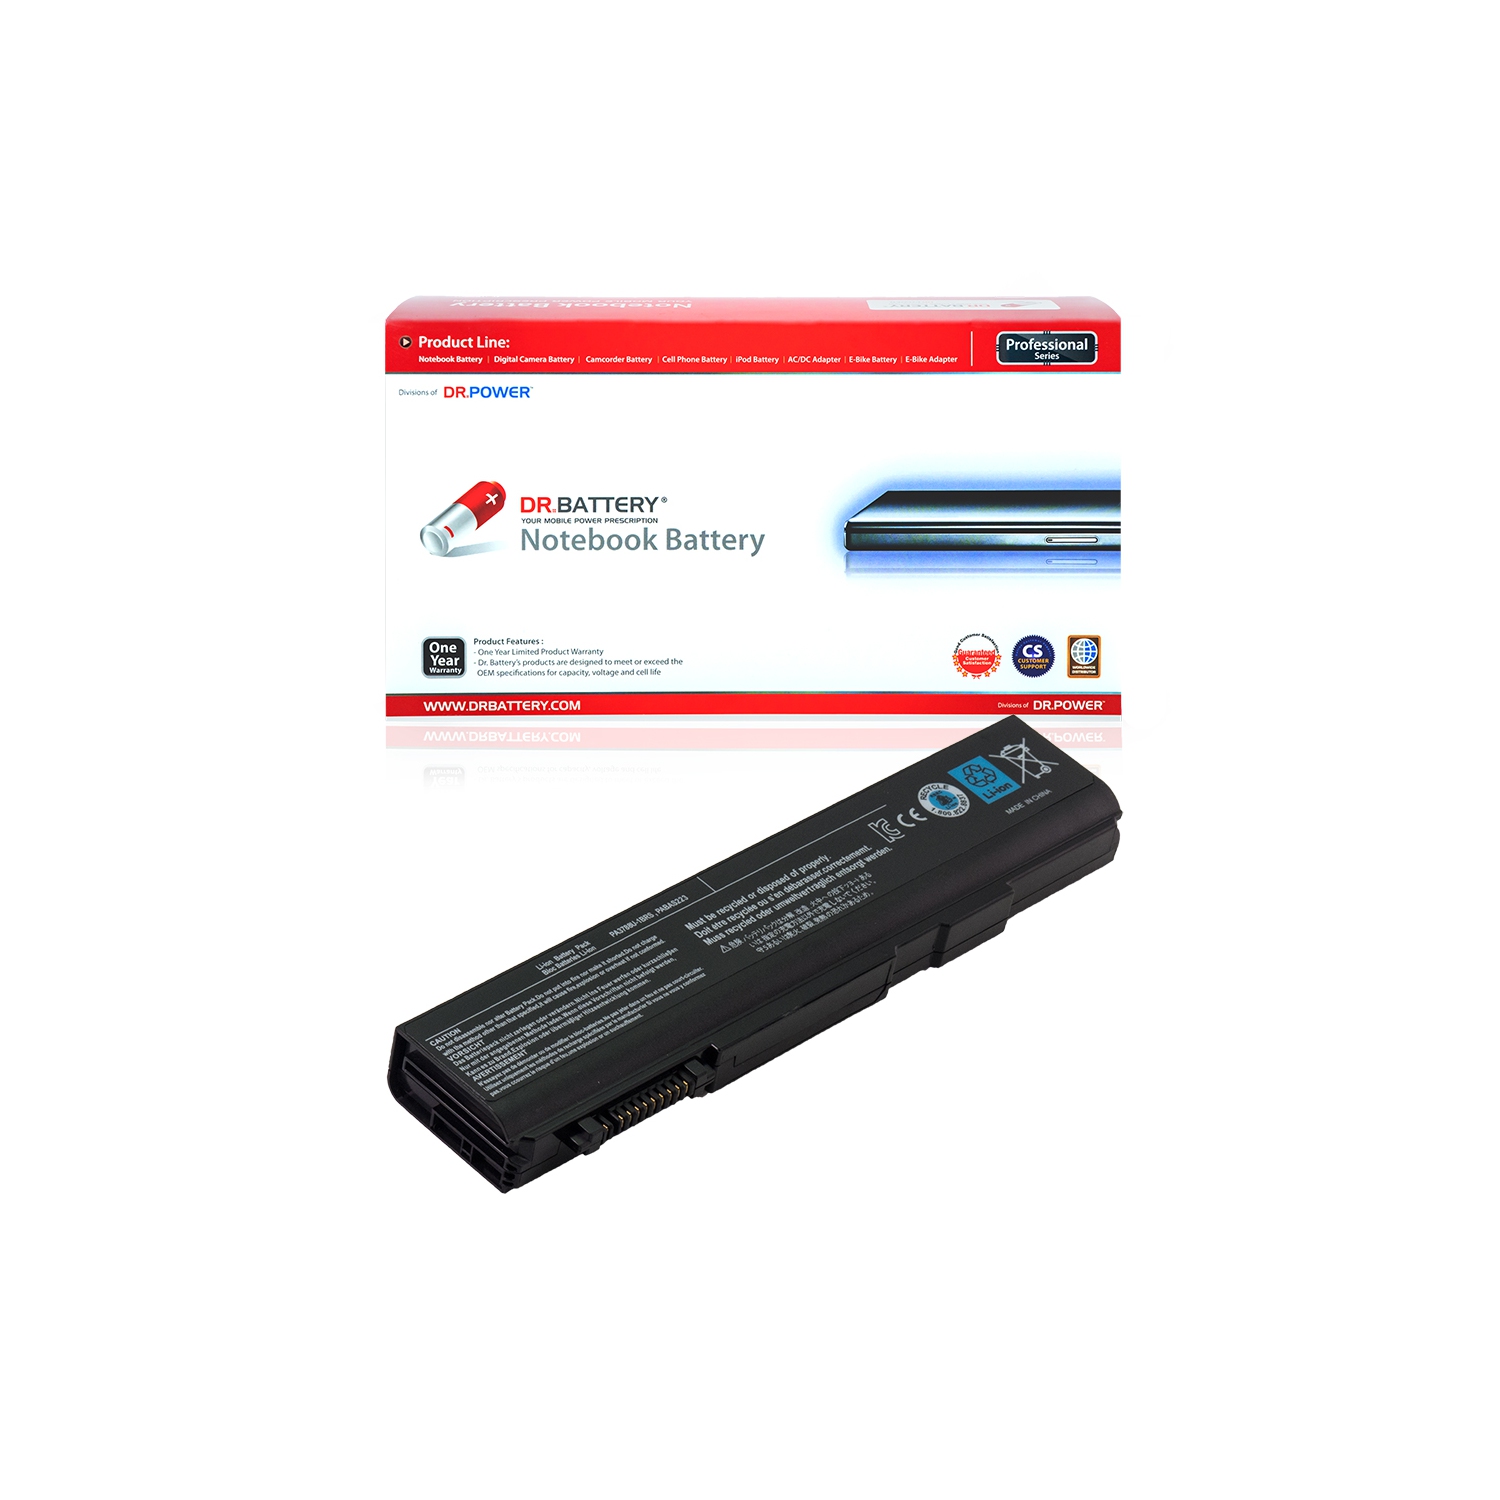 DR. BATTERY - Replacement for Toshiba Satellite Pro S500-0EE / S750 / PA3787U-1BRS / PA3788U-1BRS / PABAS221 / PABAS222